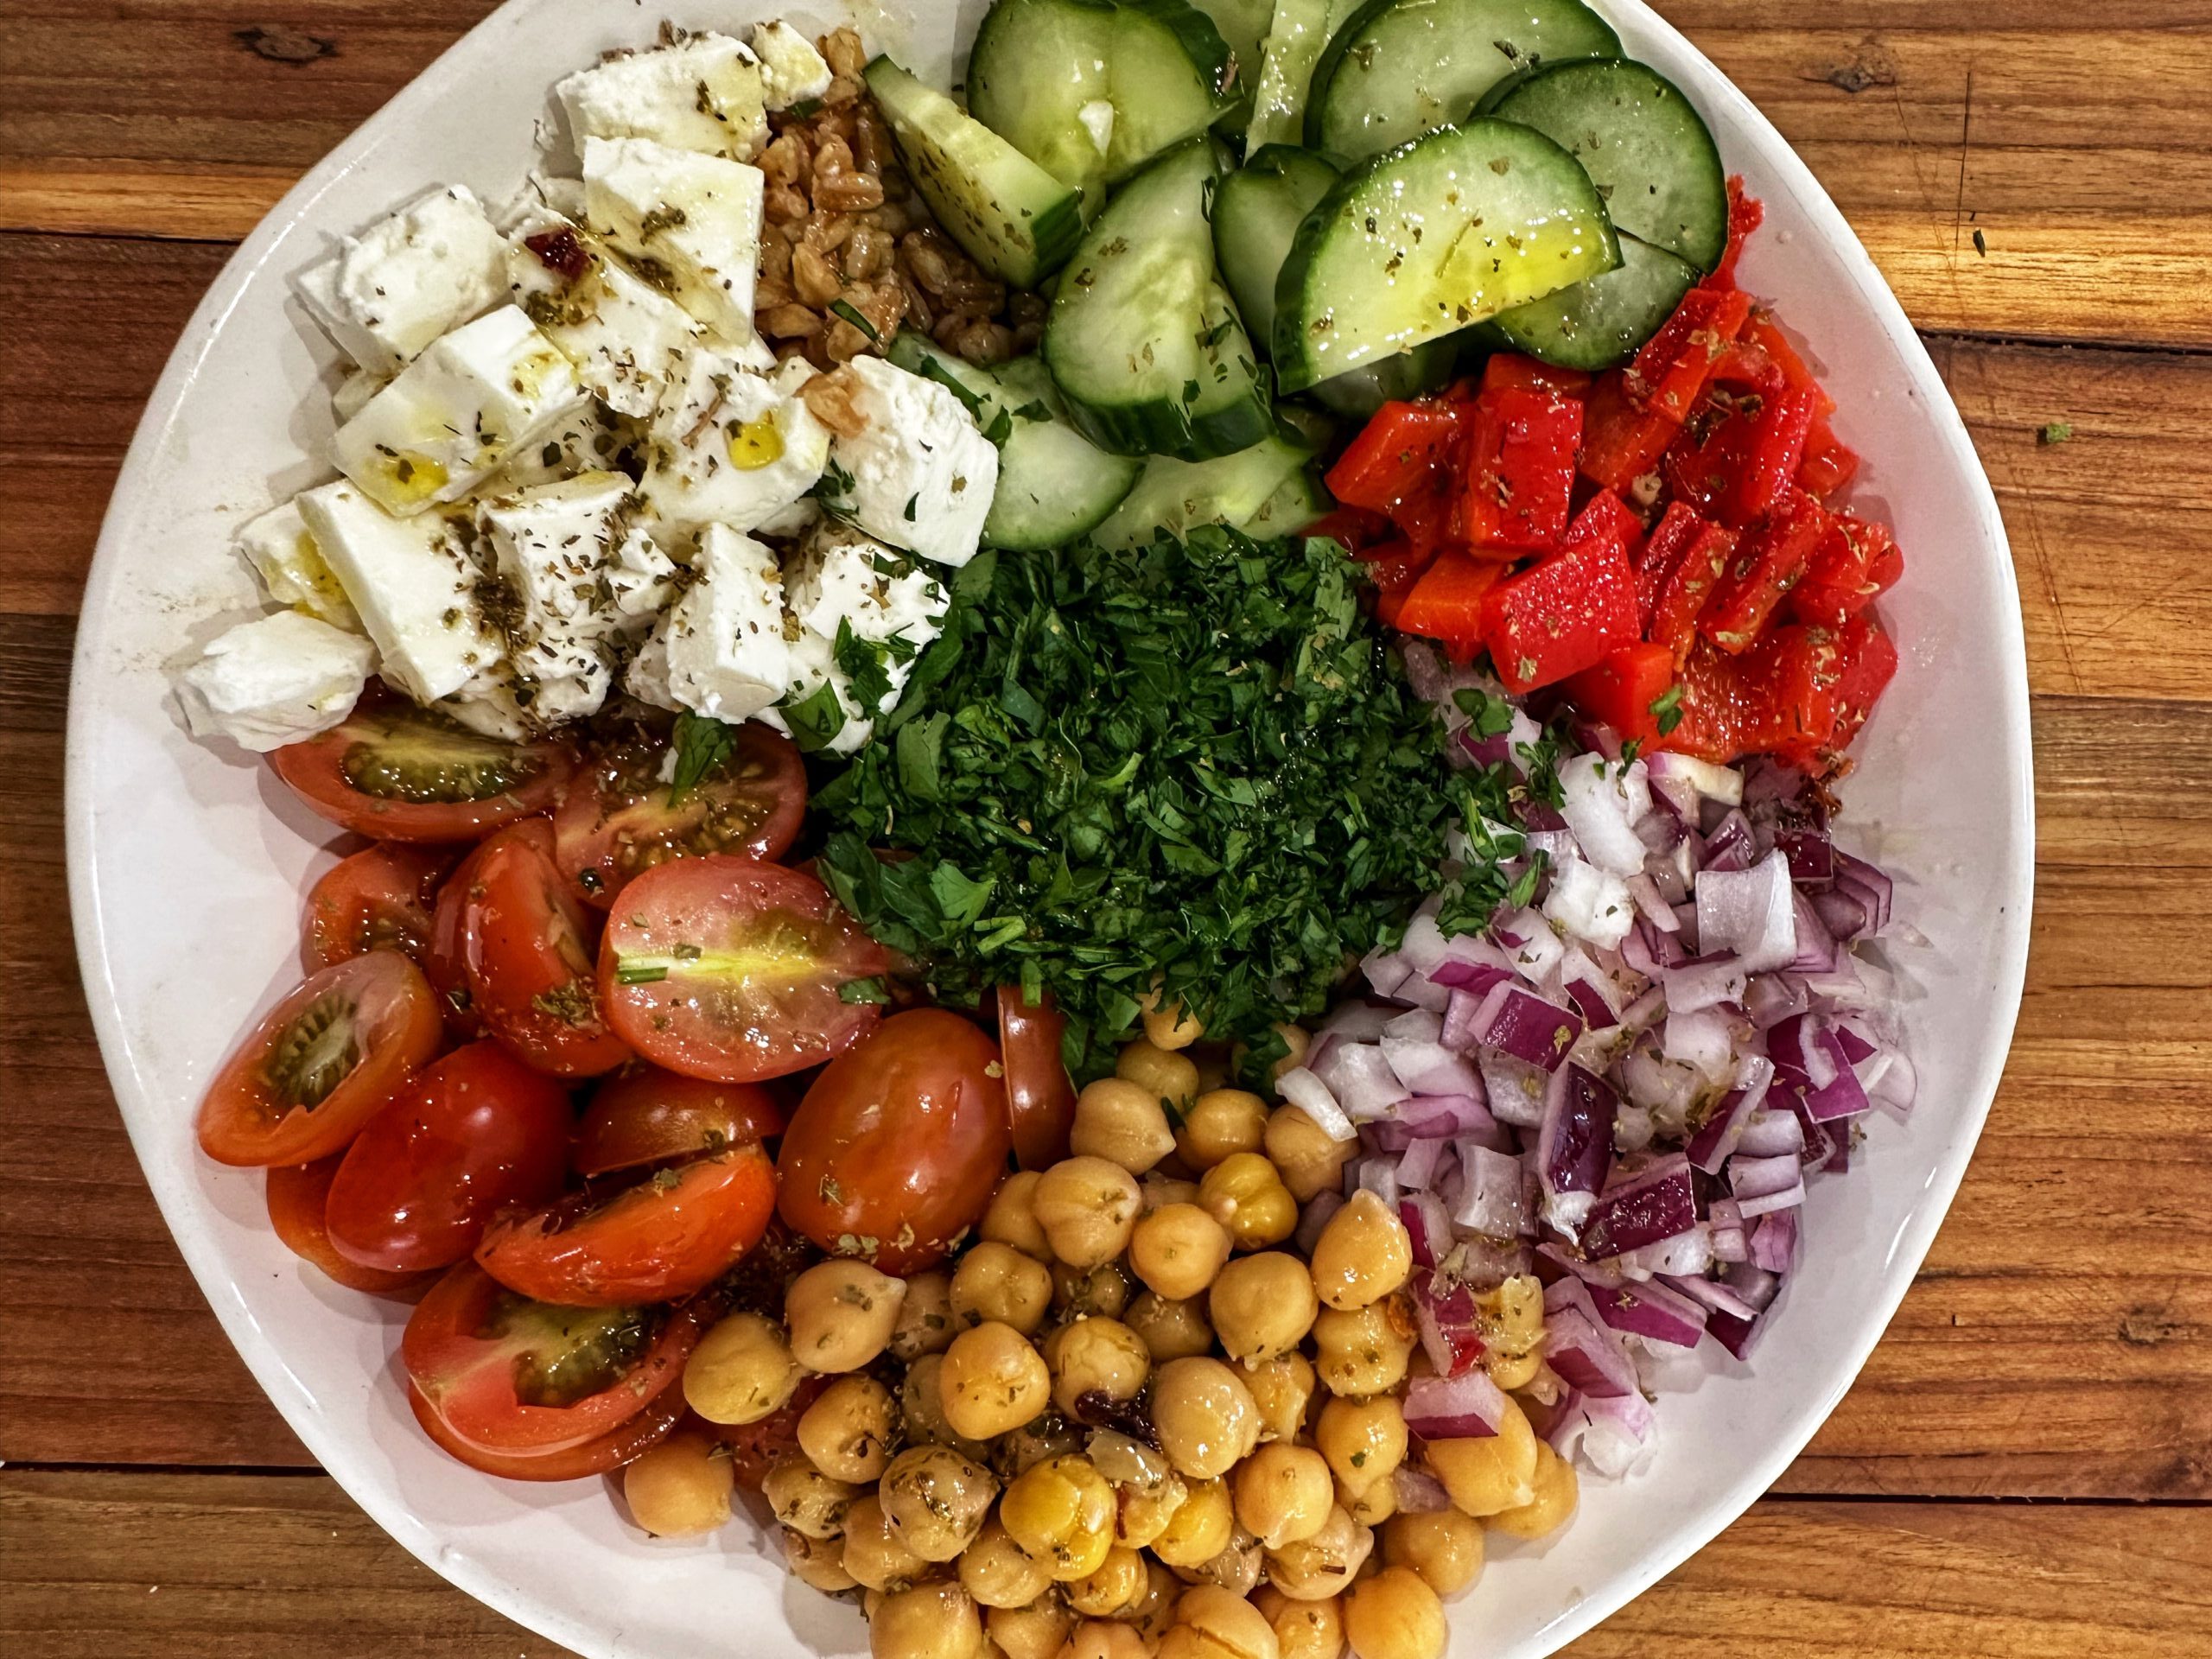 A bowl of food with different vegetables and garnish.